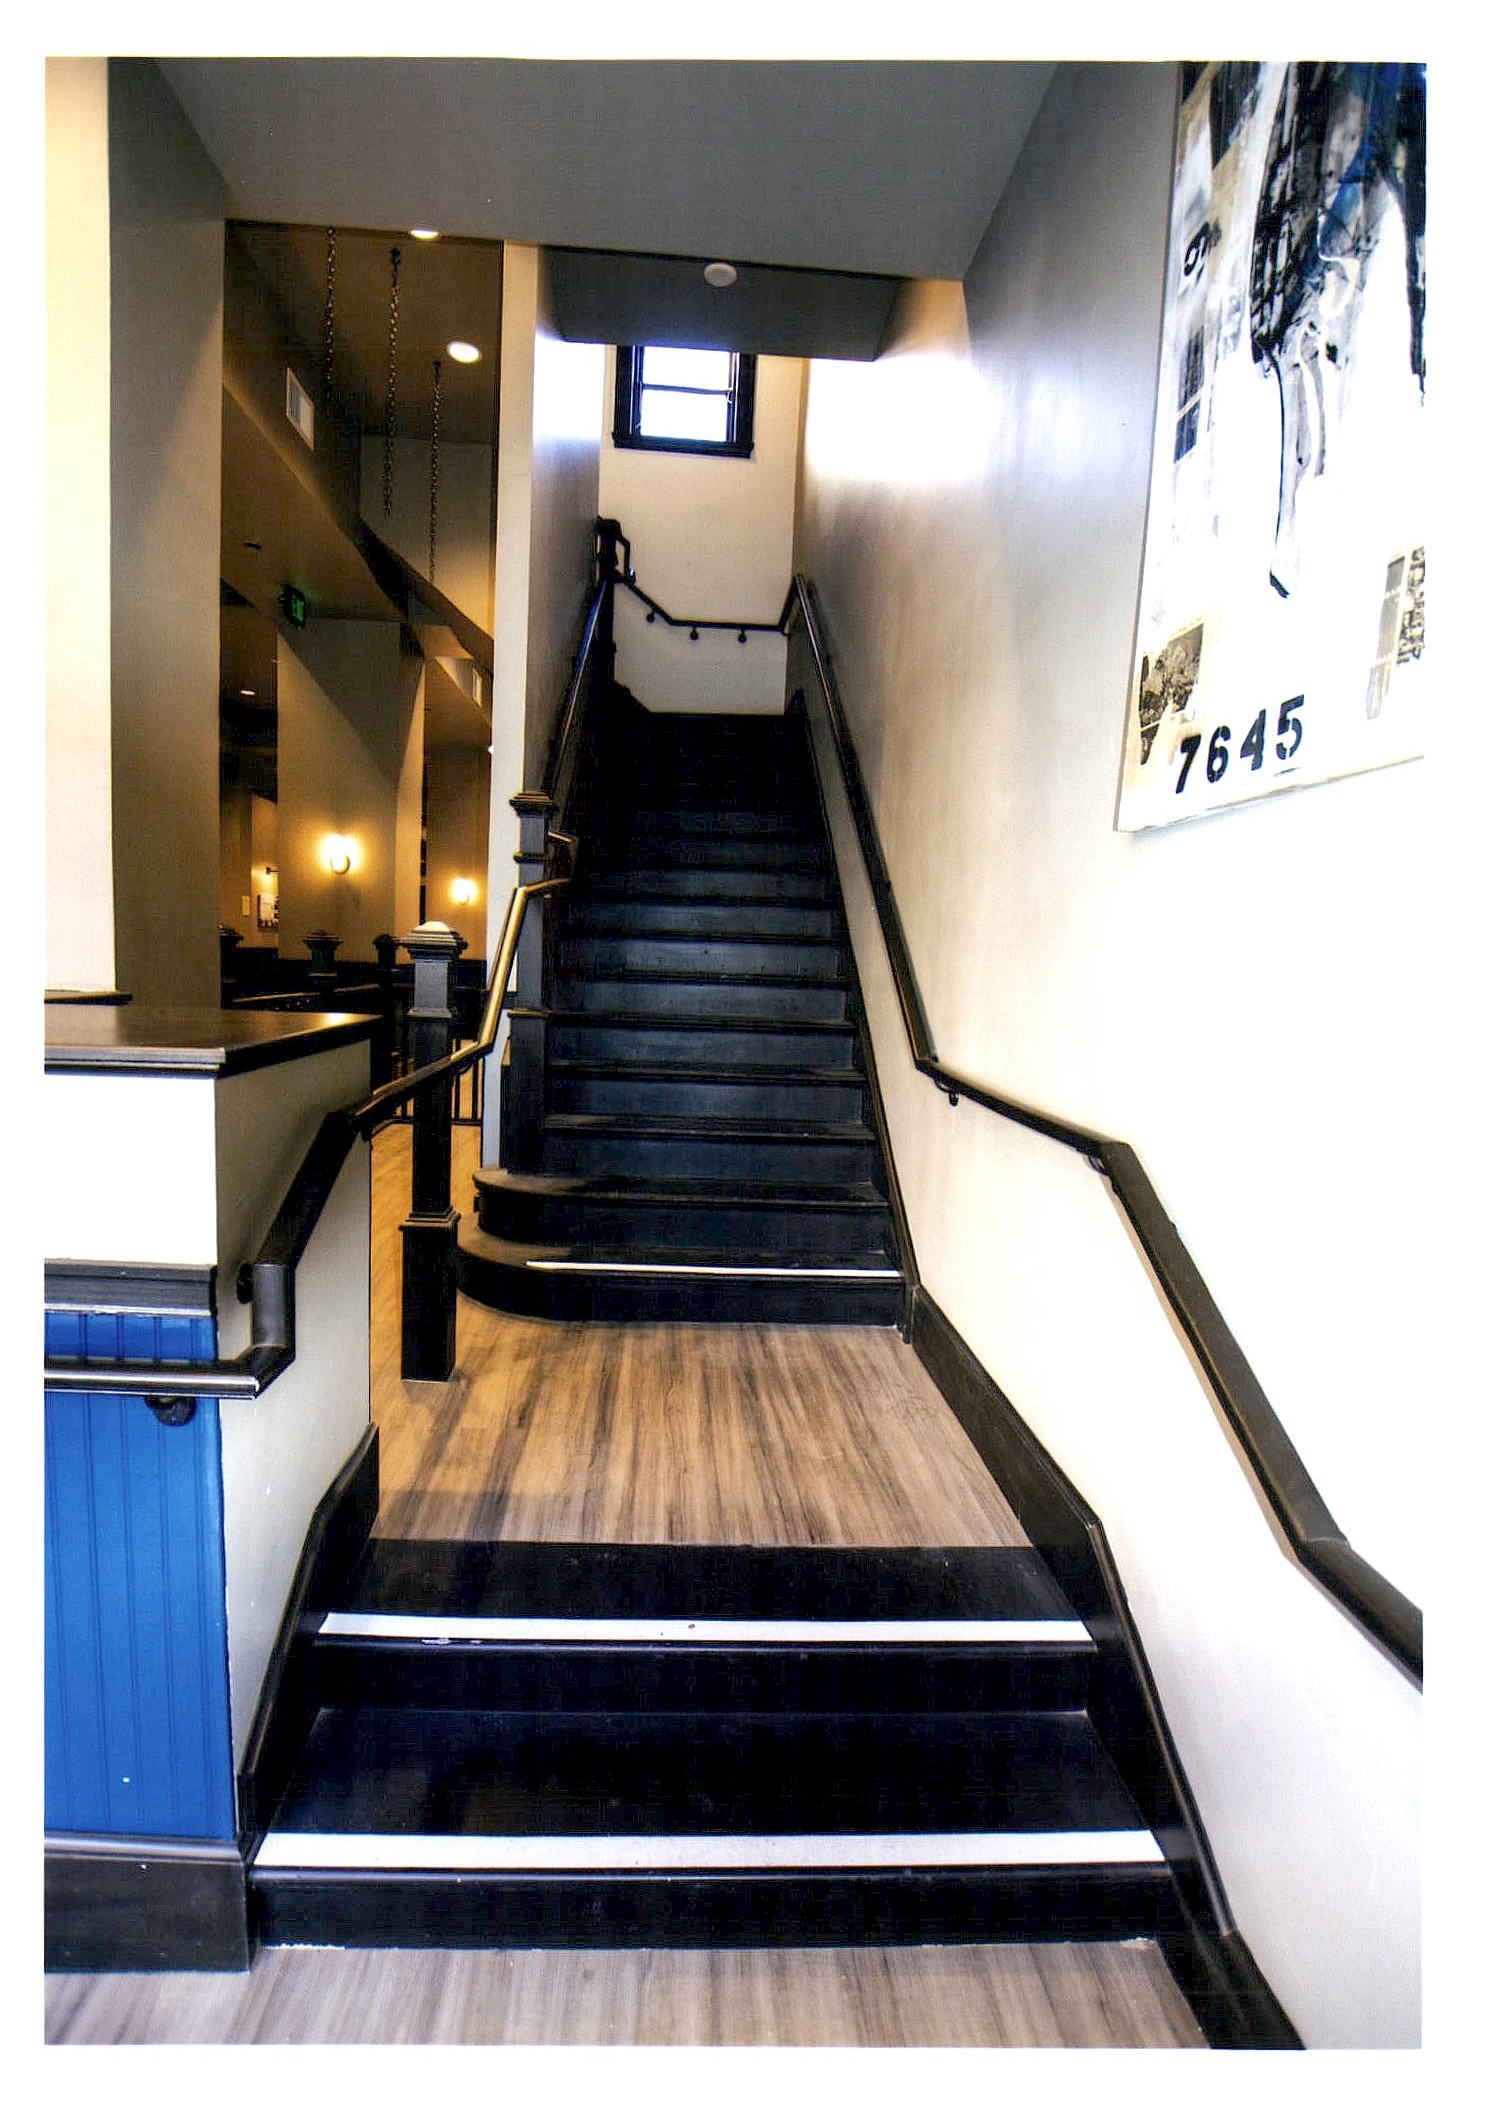 After: view of the main stair opposite the lobby entrance. Elevator is to the left.